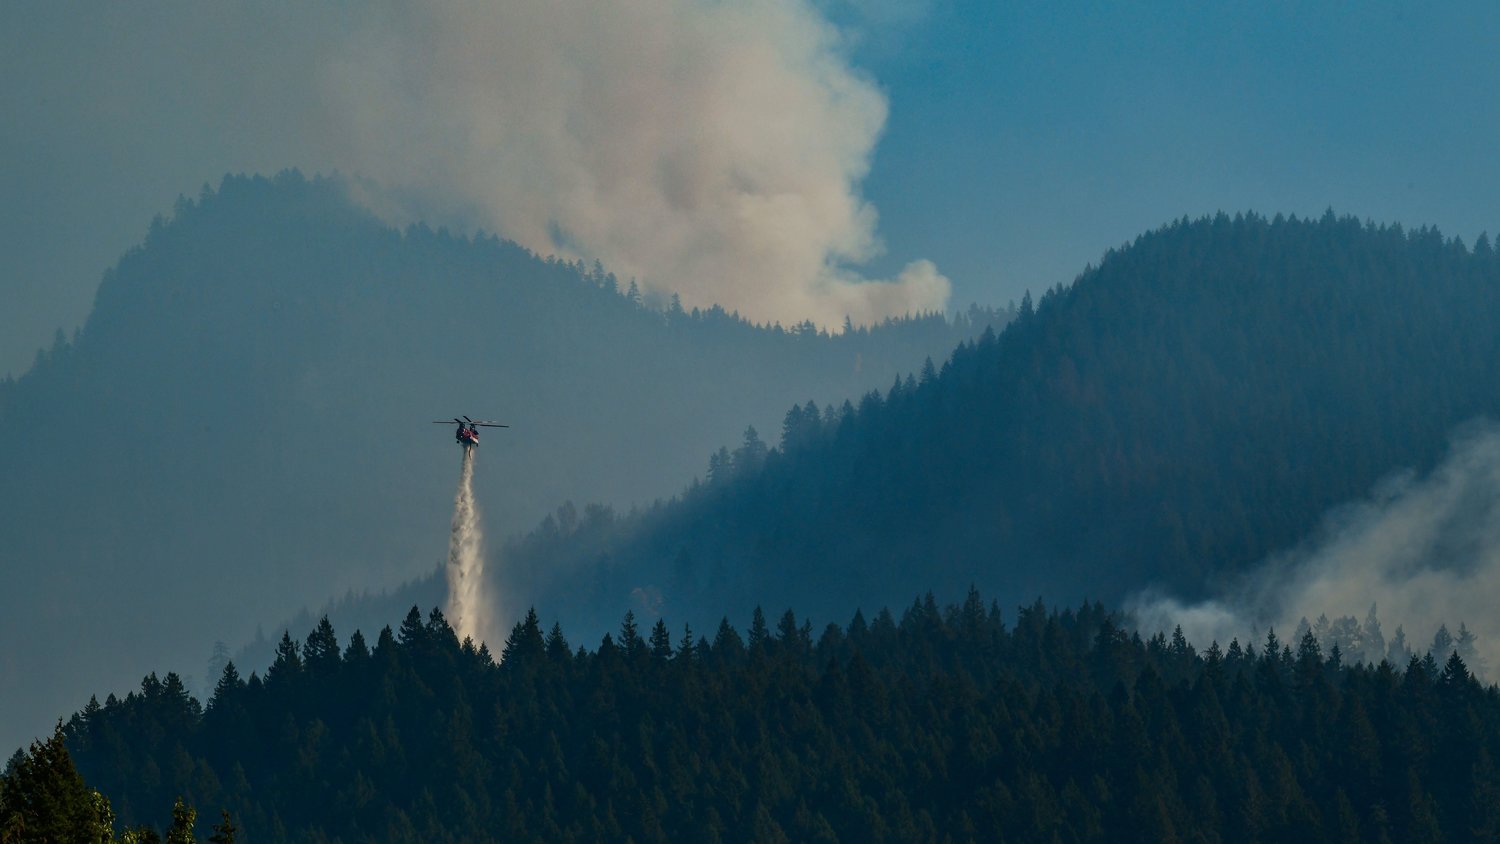 A helicopter dumps water over the Goat Rocks Fire as seen from High Valley near Packwood on Sunday.